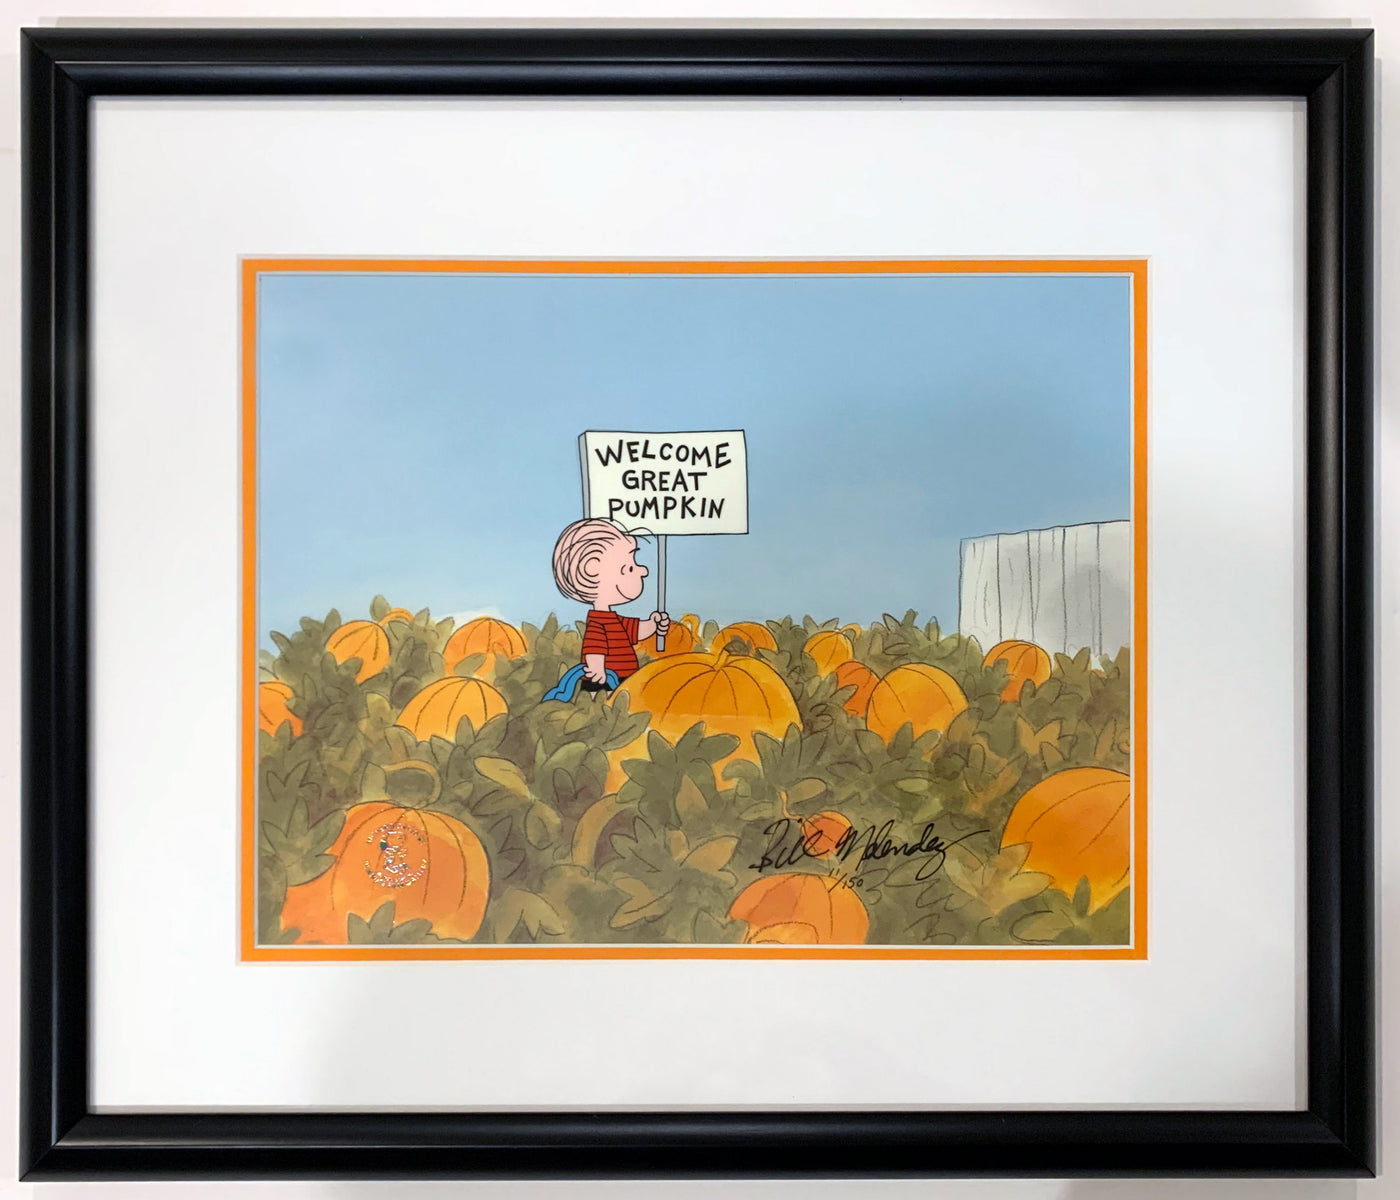 Original Peanuts Limited Edition Cel, Welcome Great Pumpkin, Signed by Bill Melendez